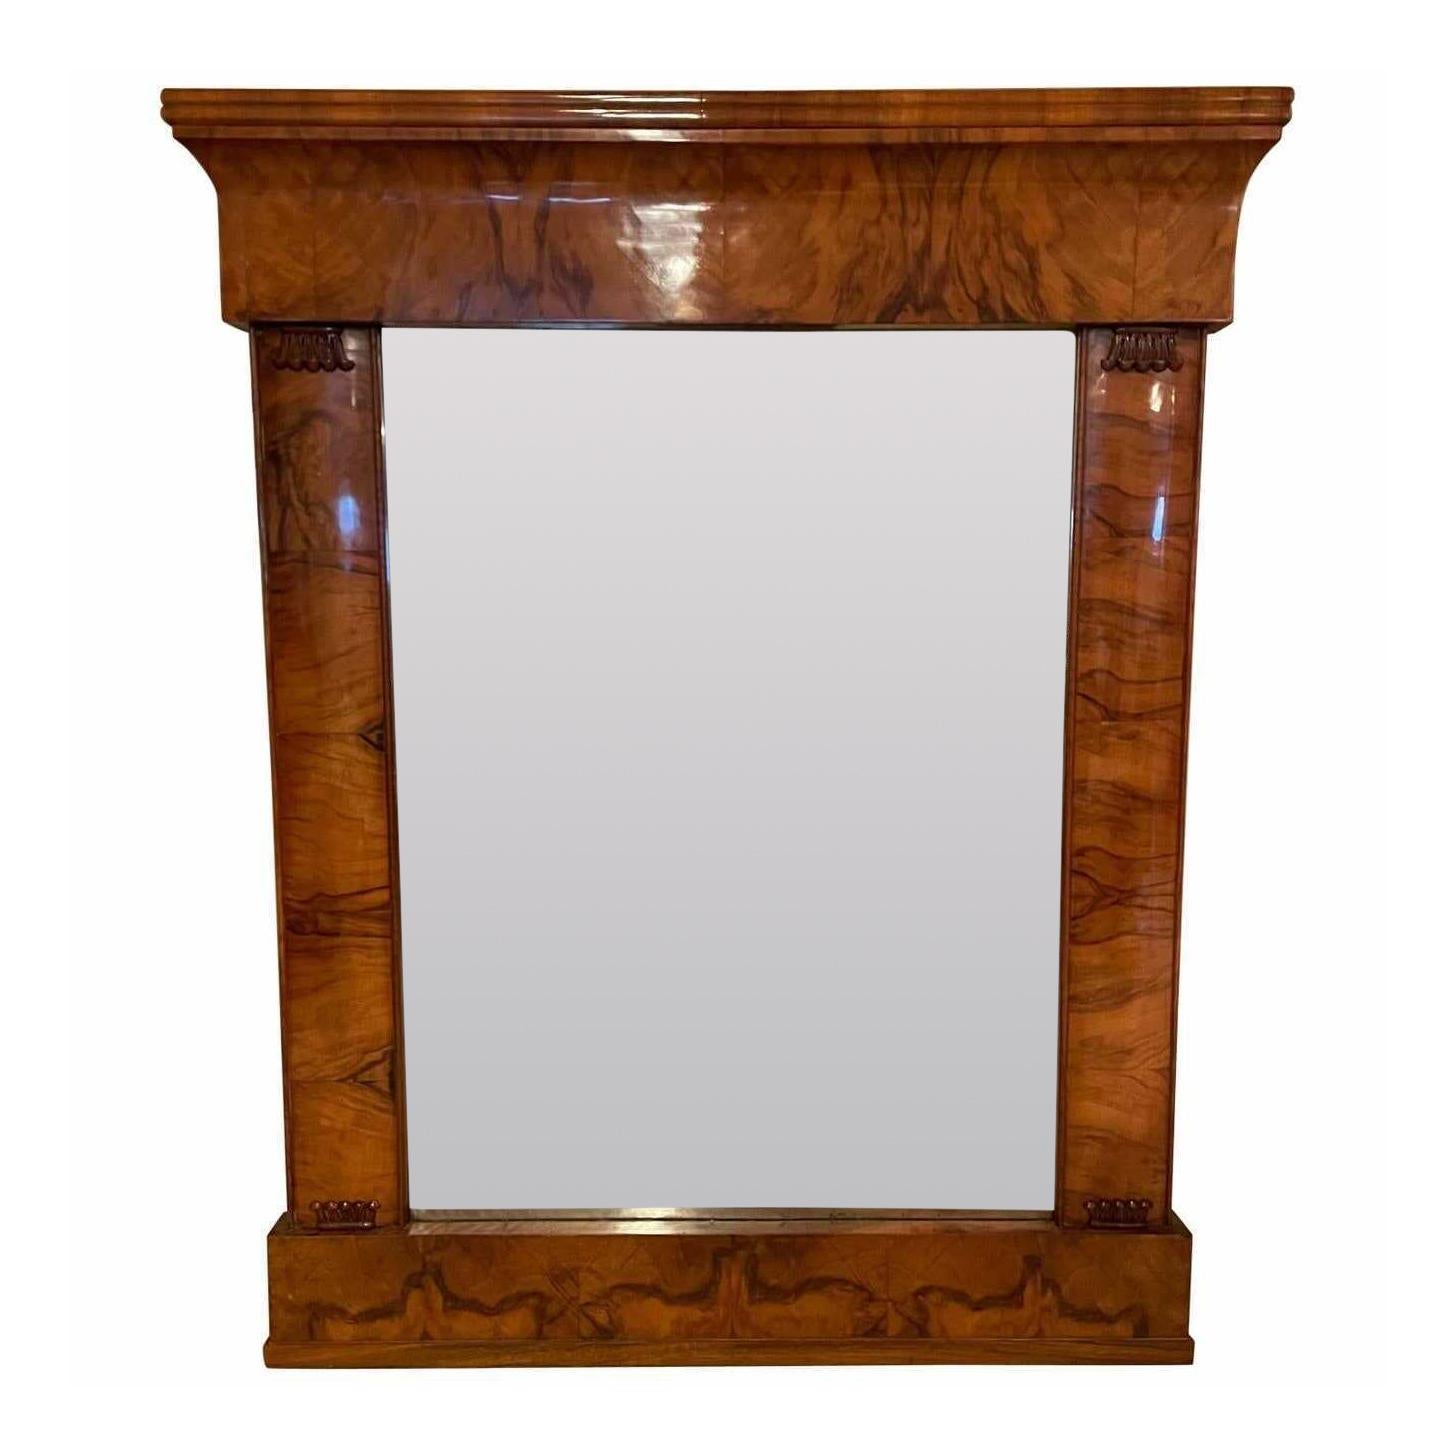 This beautiful original Biedermeier mirror dates back to circa 1820 and was made in South Germany. It is embellished with a beautiful walnut veneer and is additionally decorated with hand carved decorations.
The mirror glass is original.
The